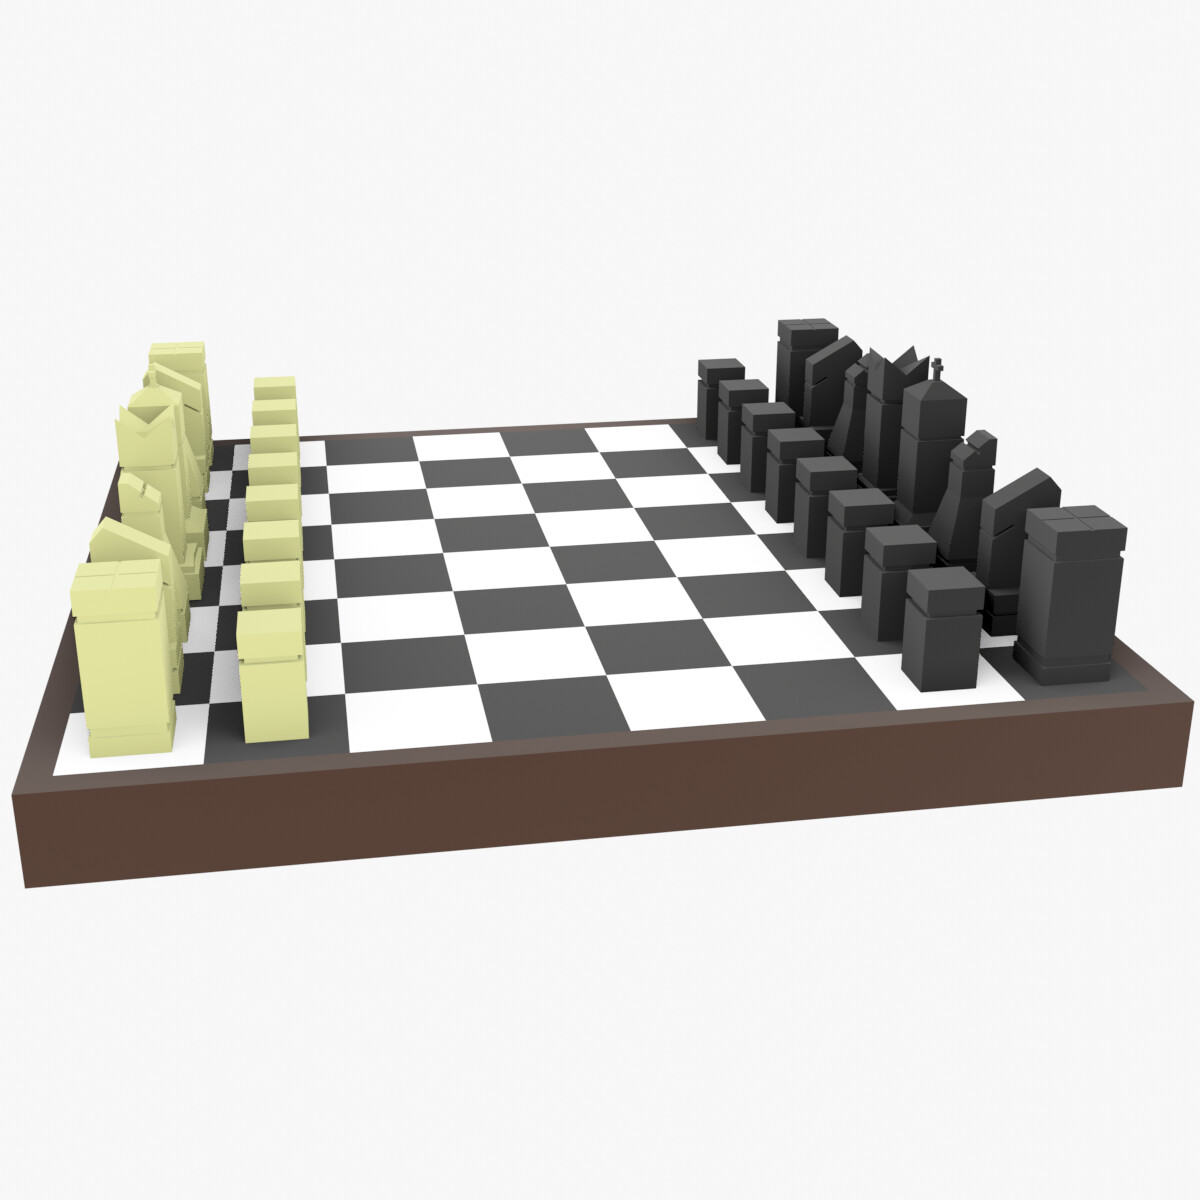 Standard chess board layout in the developed software.